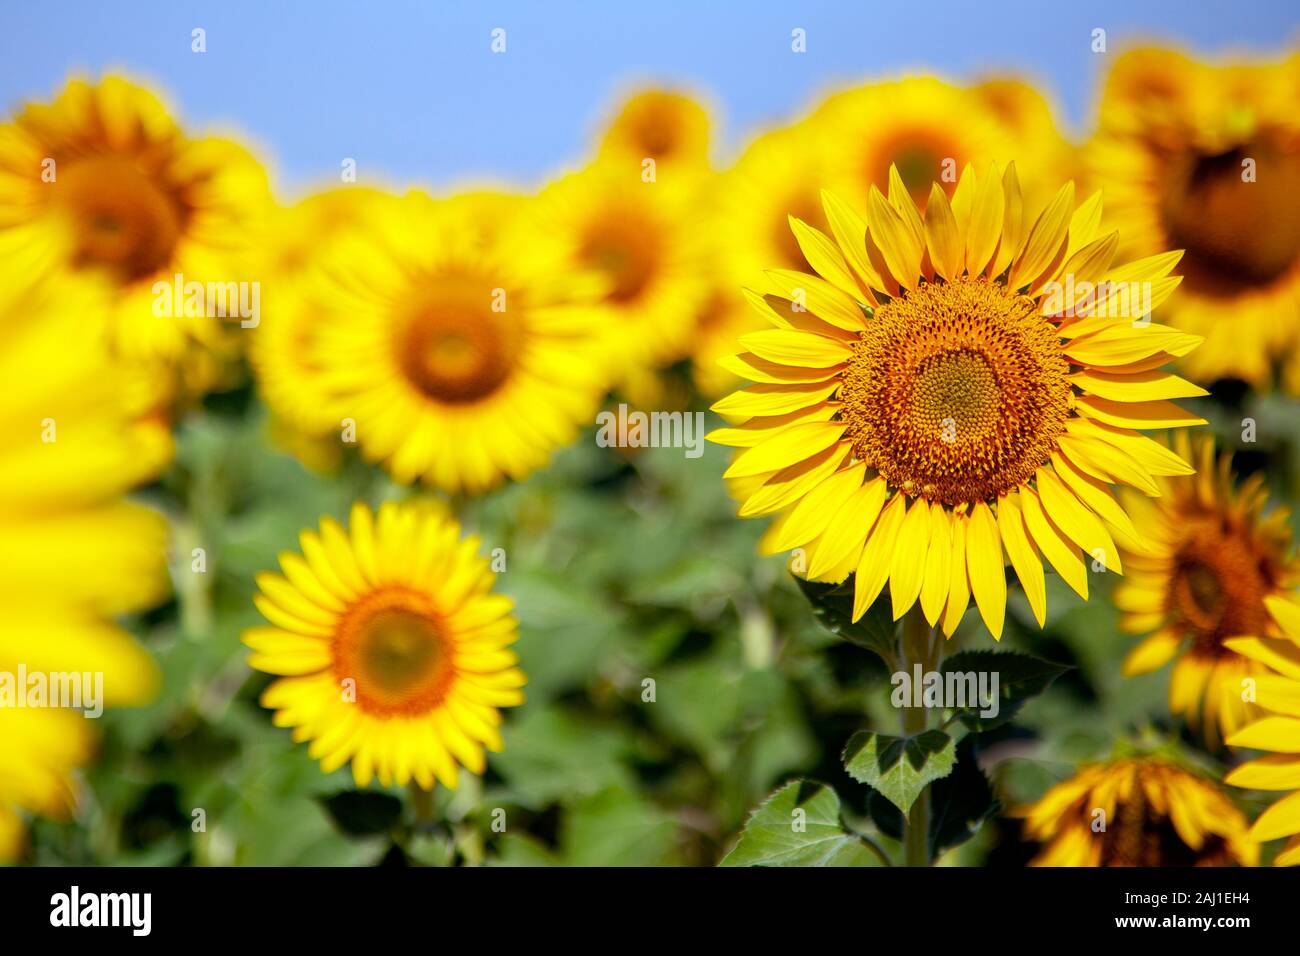 Plantation of sunflowers with a blue sky day Stock Photo